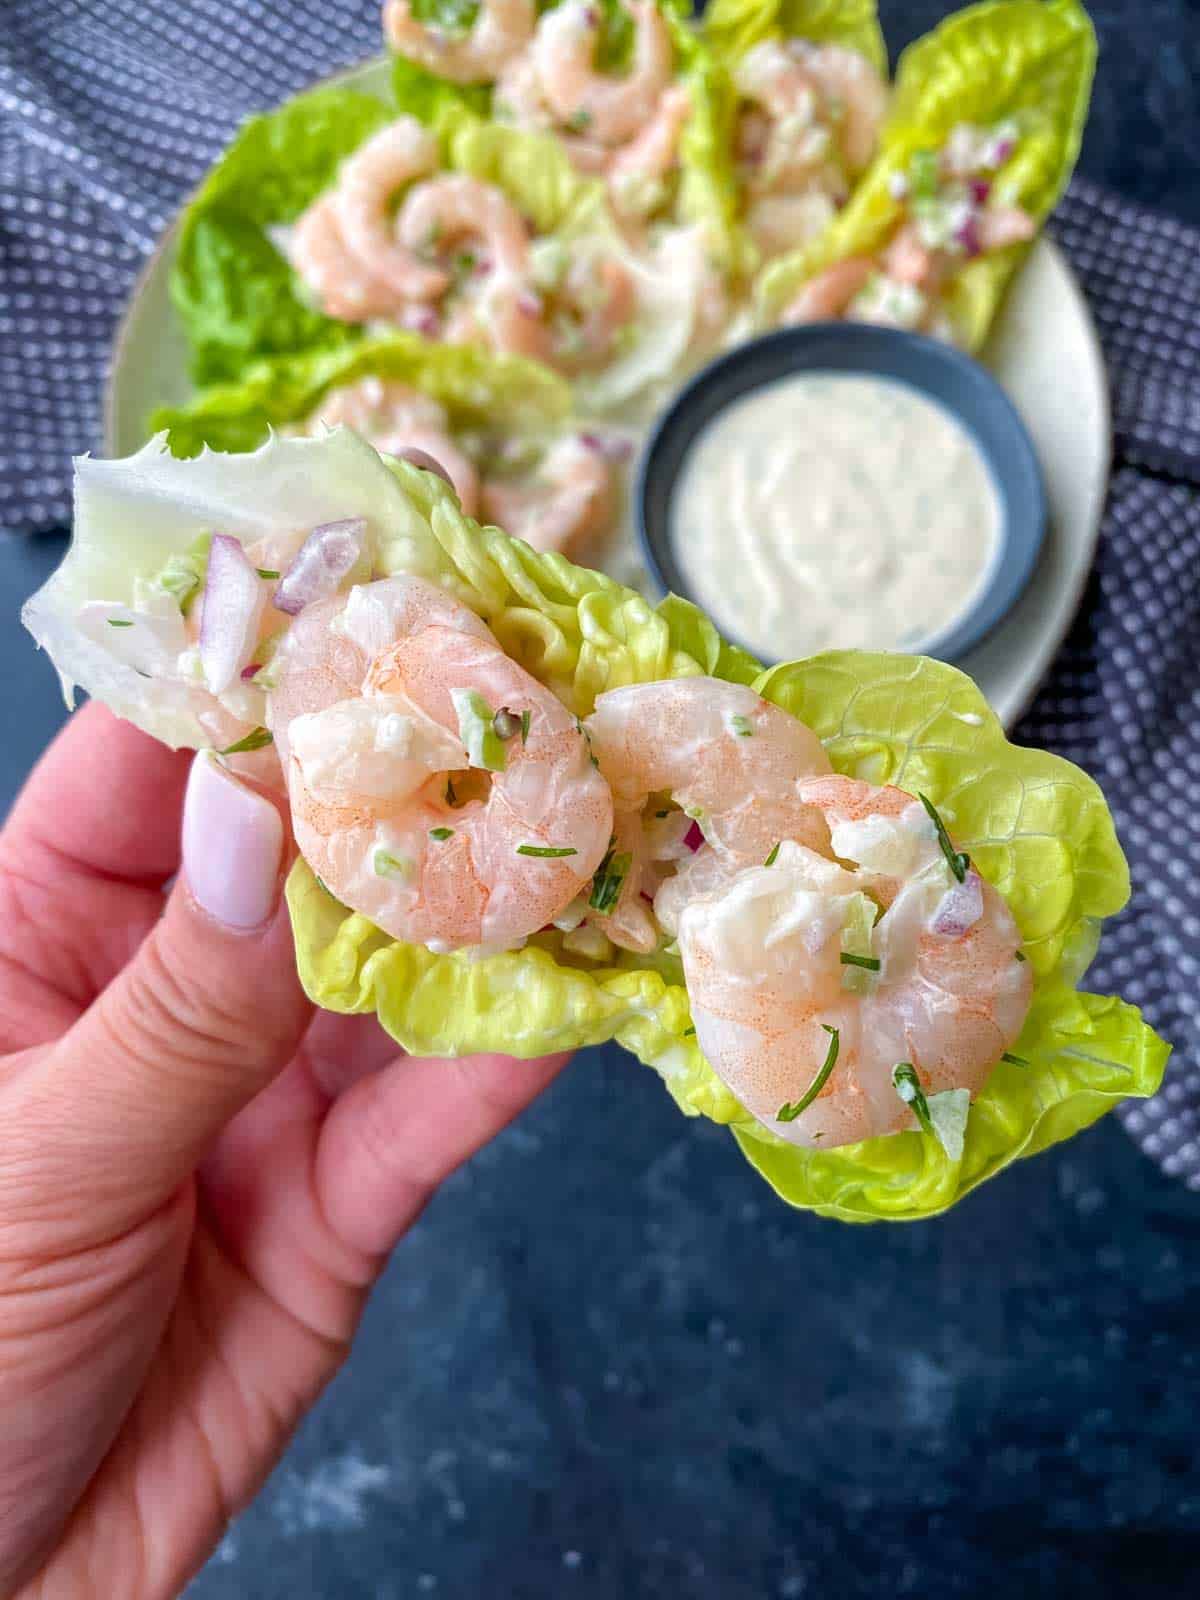 Hand holding a lettuce cup of shrimp salad